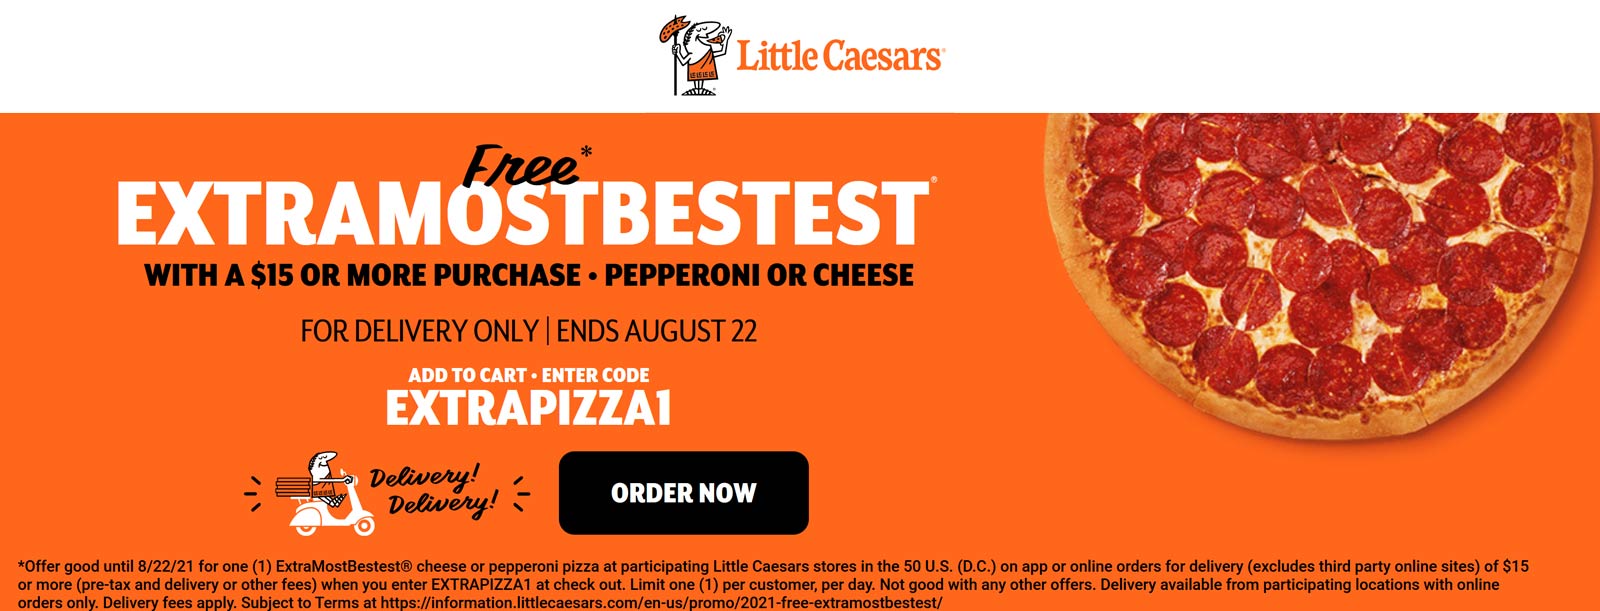 Little Caesars restaurants Coupon  Free ExtraMostBestest cheese or pepperoni pizza with $15 delivery at Little Caesars via promo code EXTRAPIZZA1 #littlecaesars 